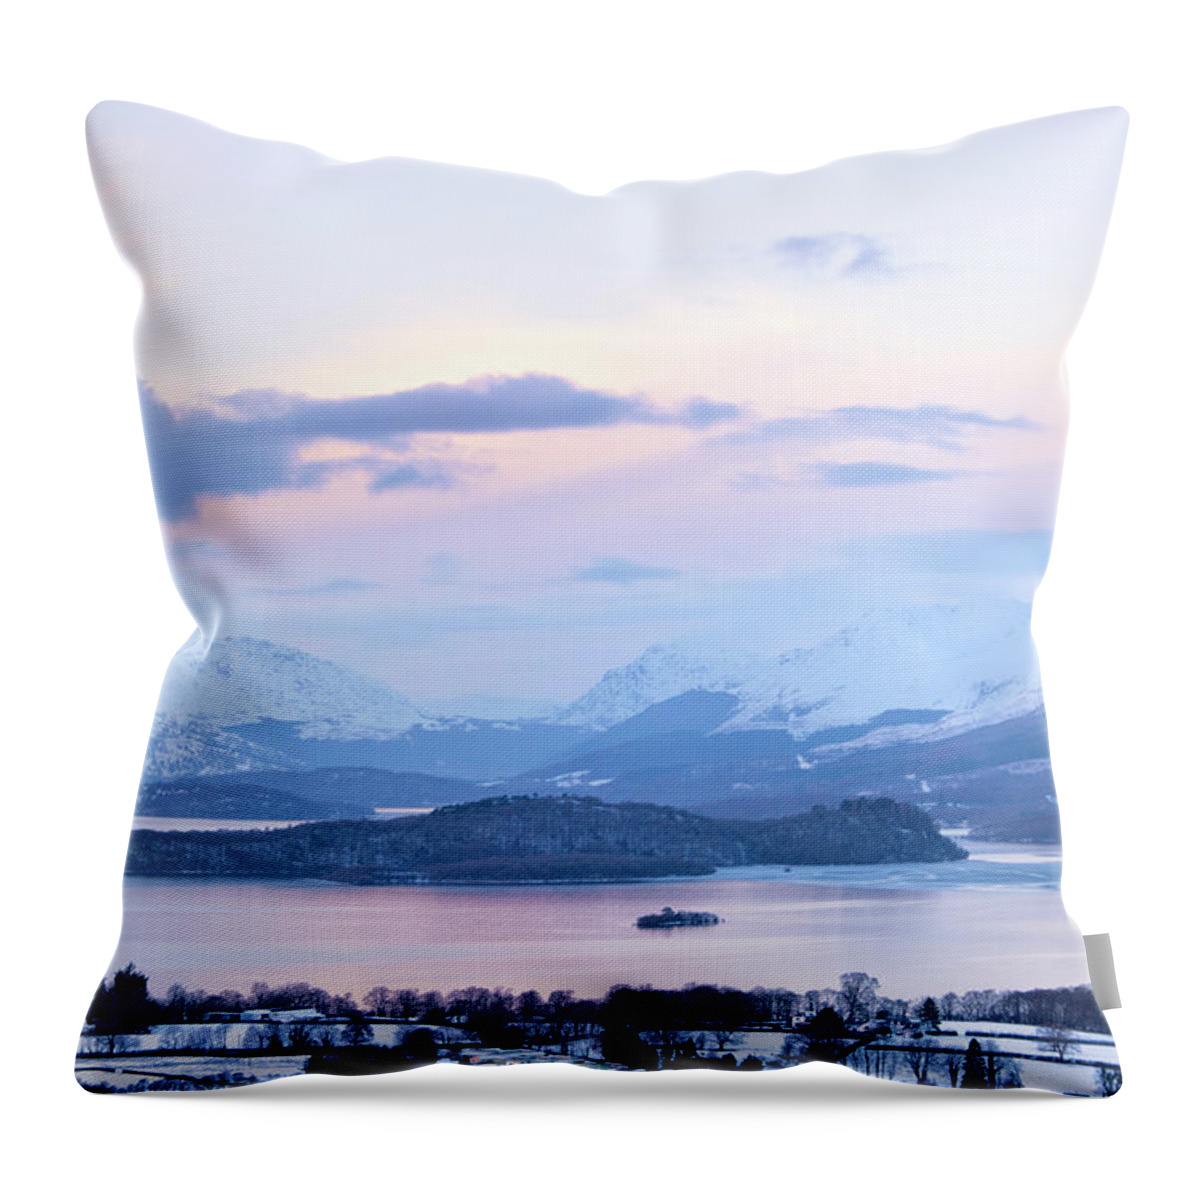 Scenics Throw Pillow featuring the photograph Loch Lomond In Winter by Theasis